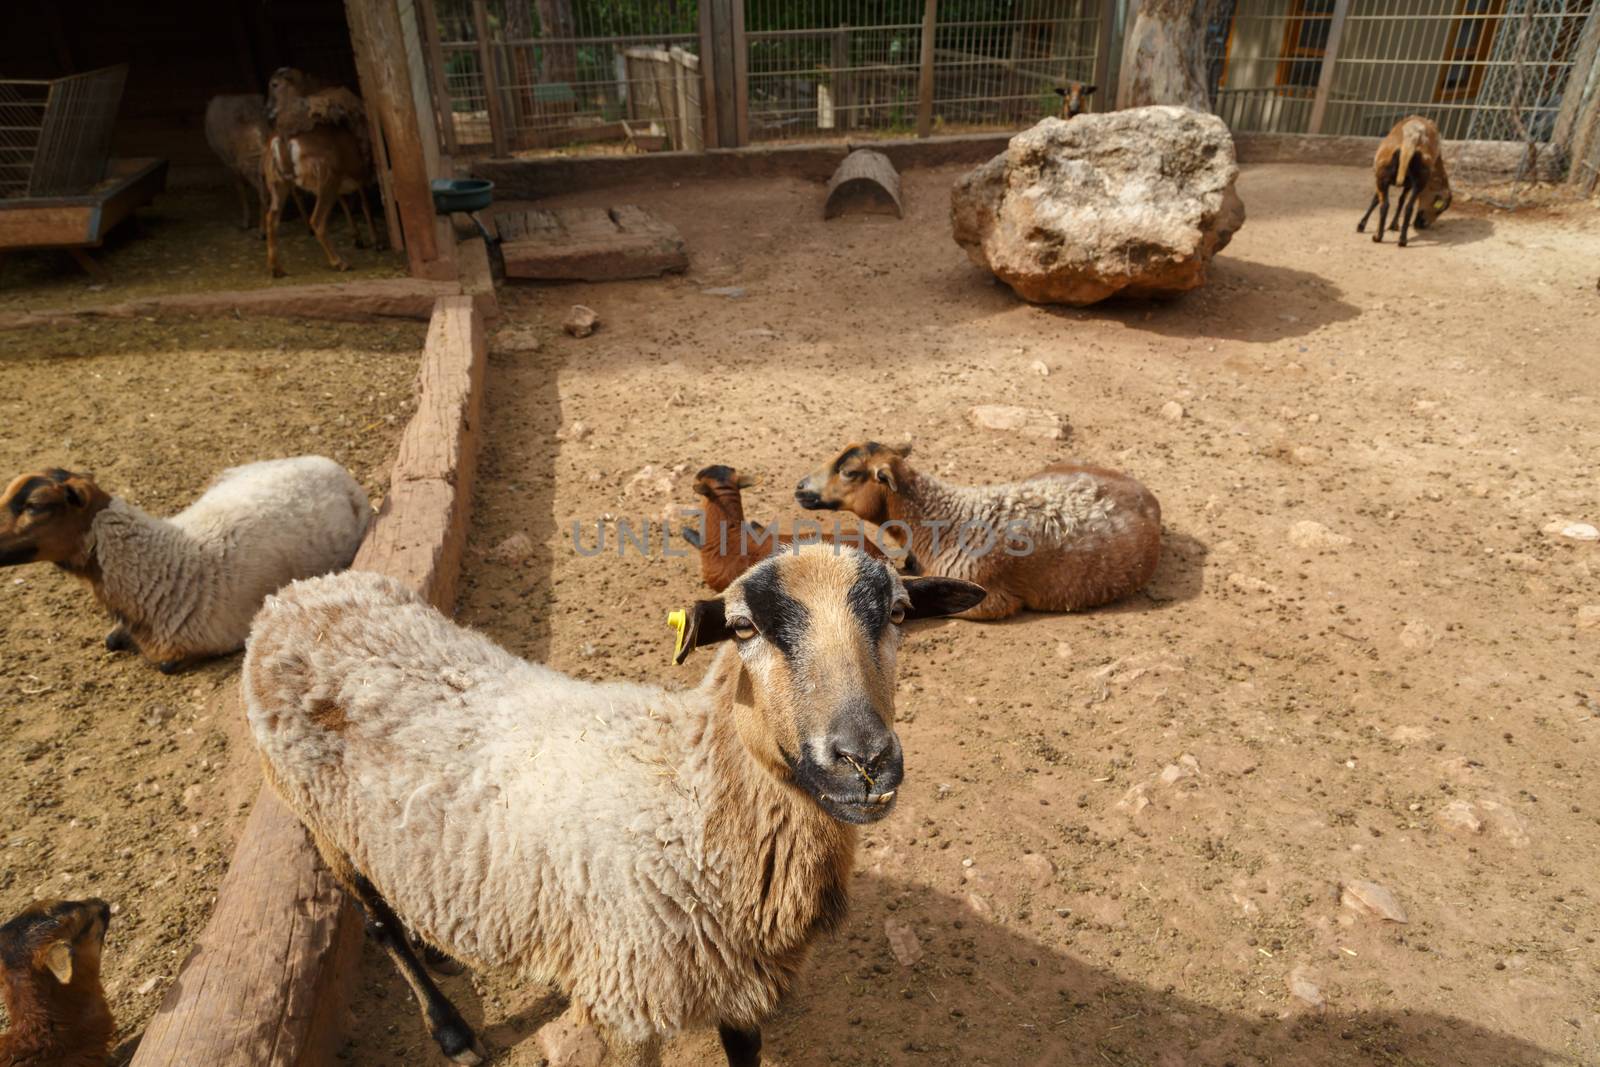 View of sheep living in a zoo, sitting in cage.